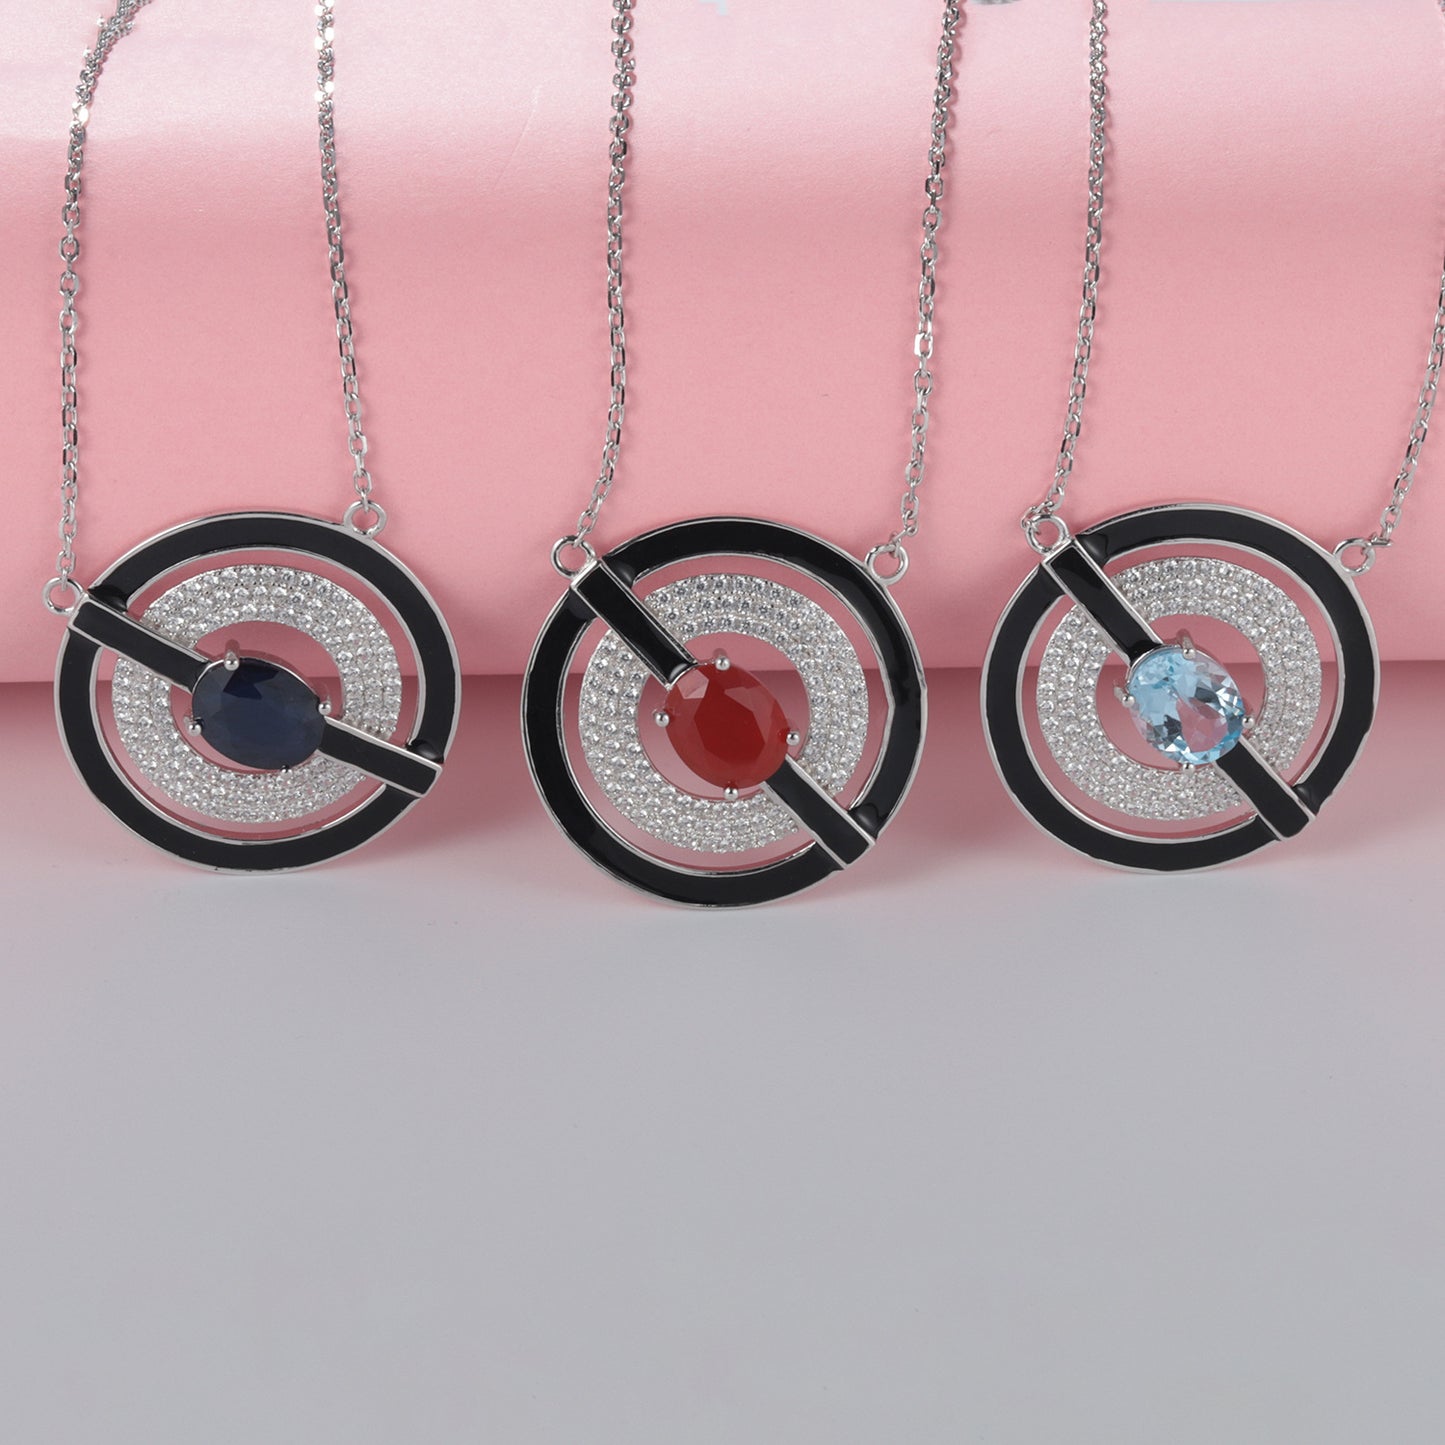 Personality Ring Design Natural Colorful Gemstone Enamel Circle Pendant Silver Necklace for Women